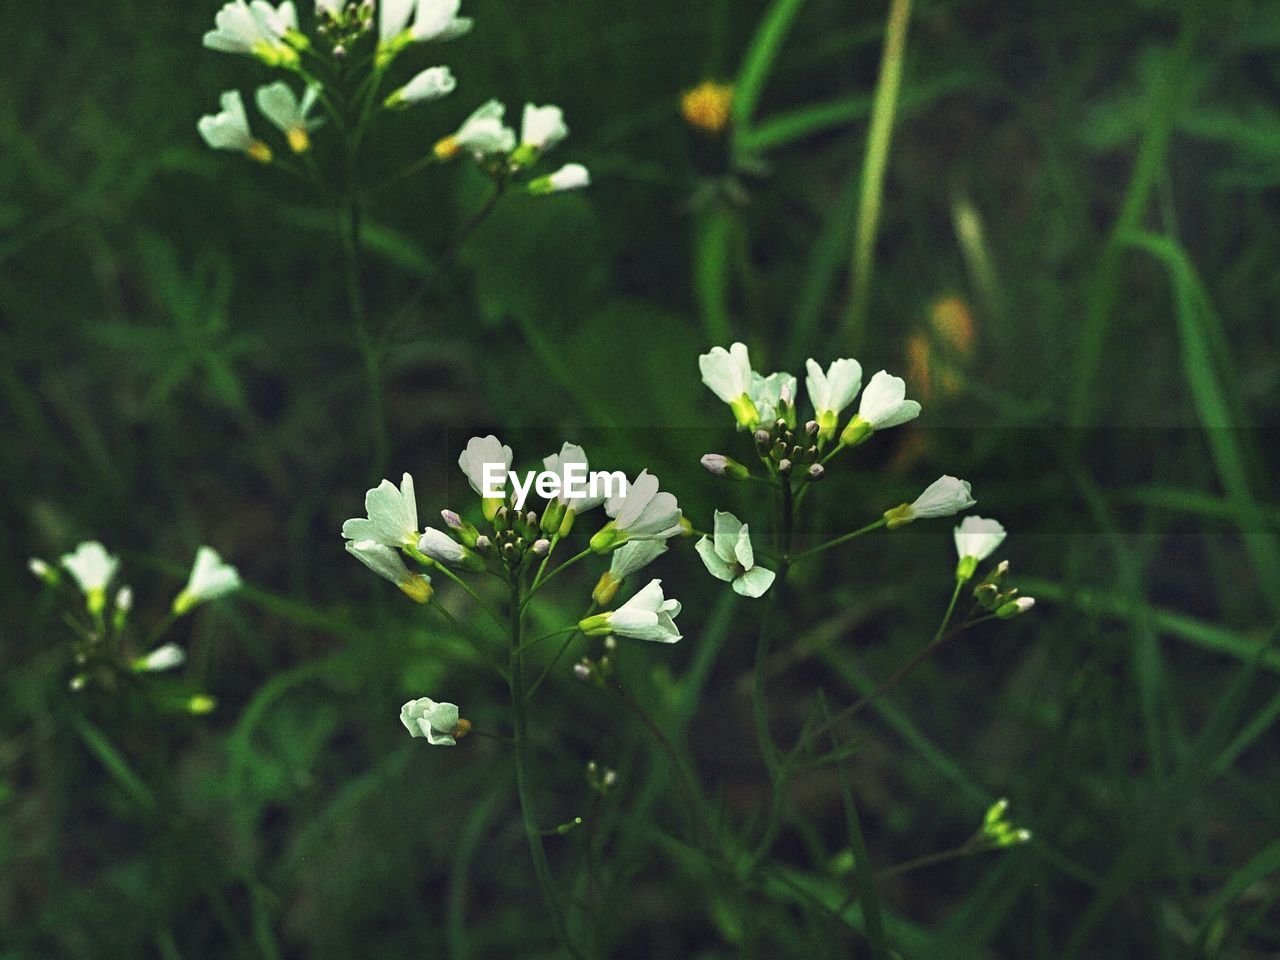 CLOSE-UP OF WHITE FLOWERS BLOOMING IN PLANT